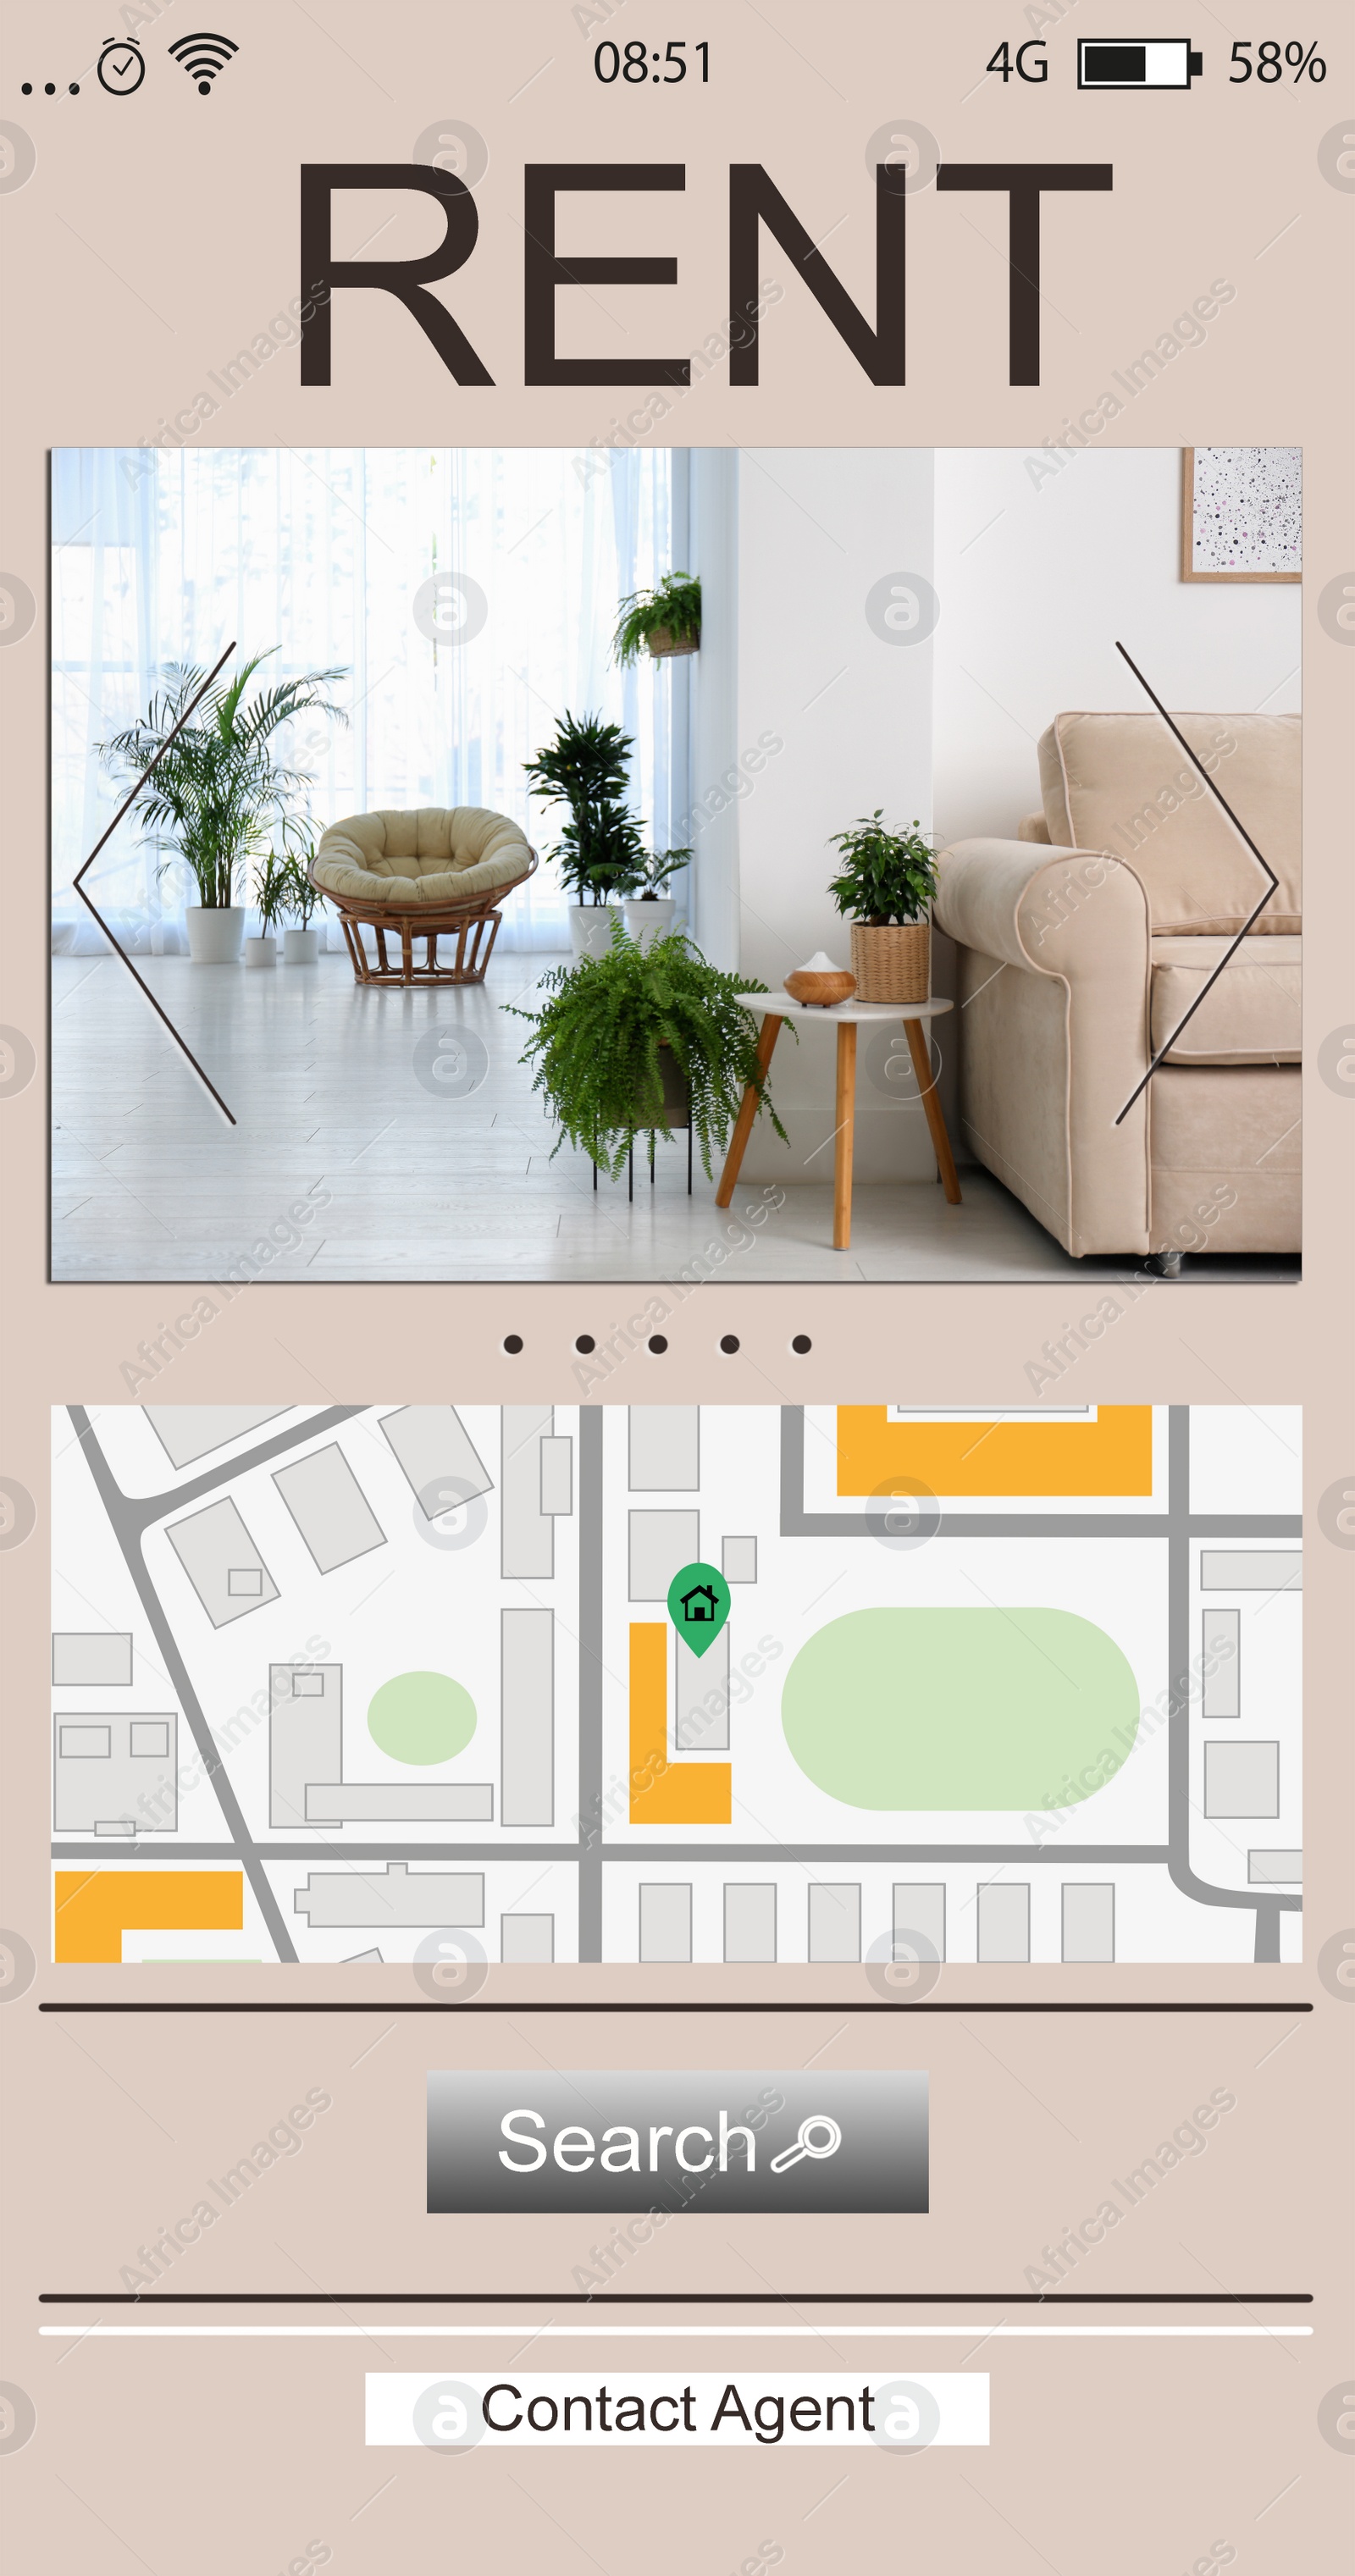 Image of Property search agency application. Rental information: photo of living room and map with address point